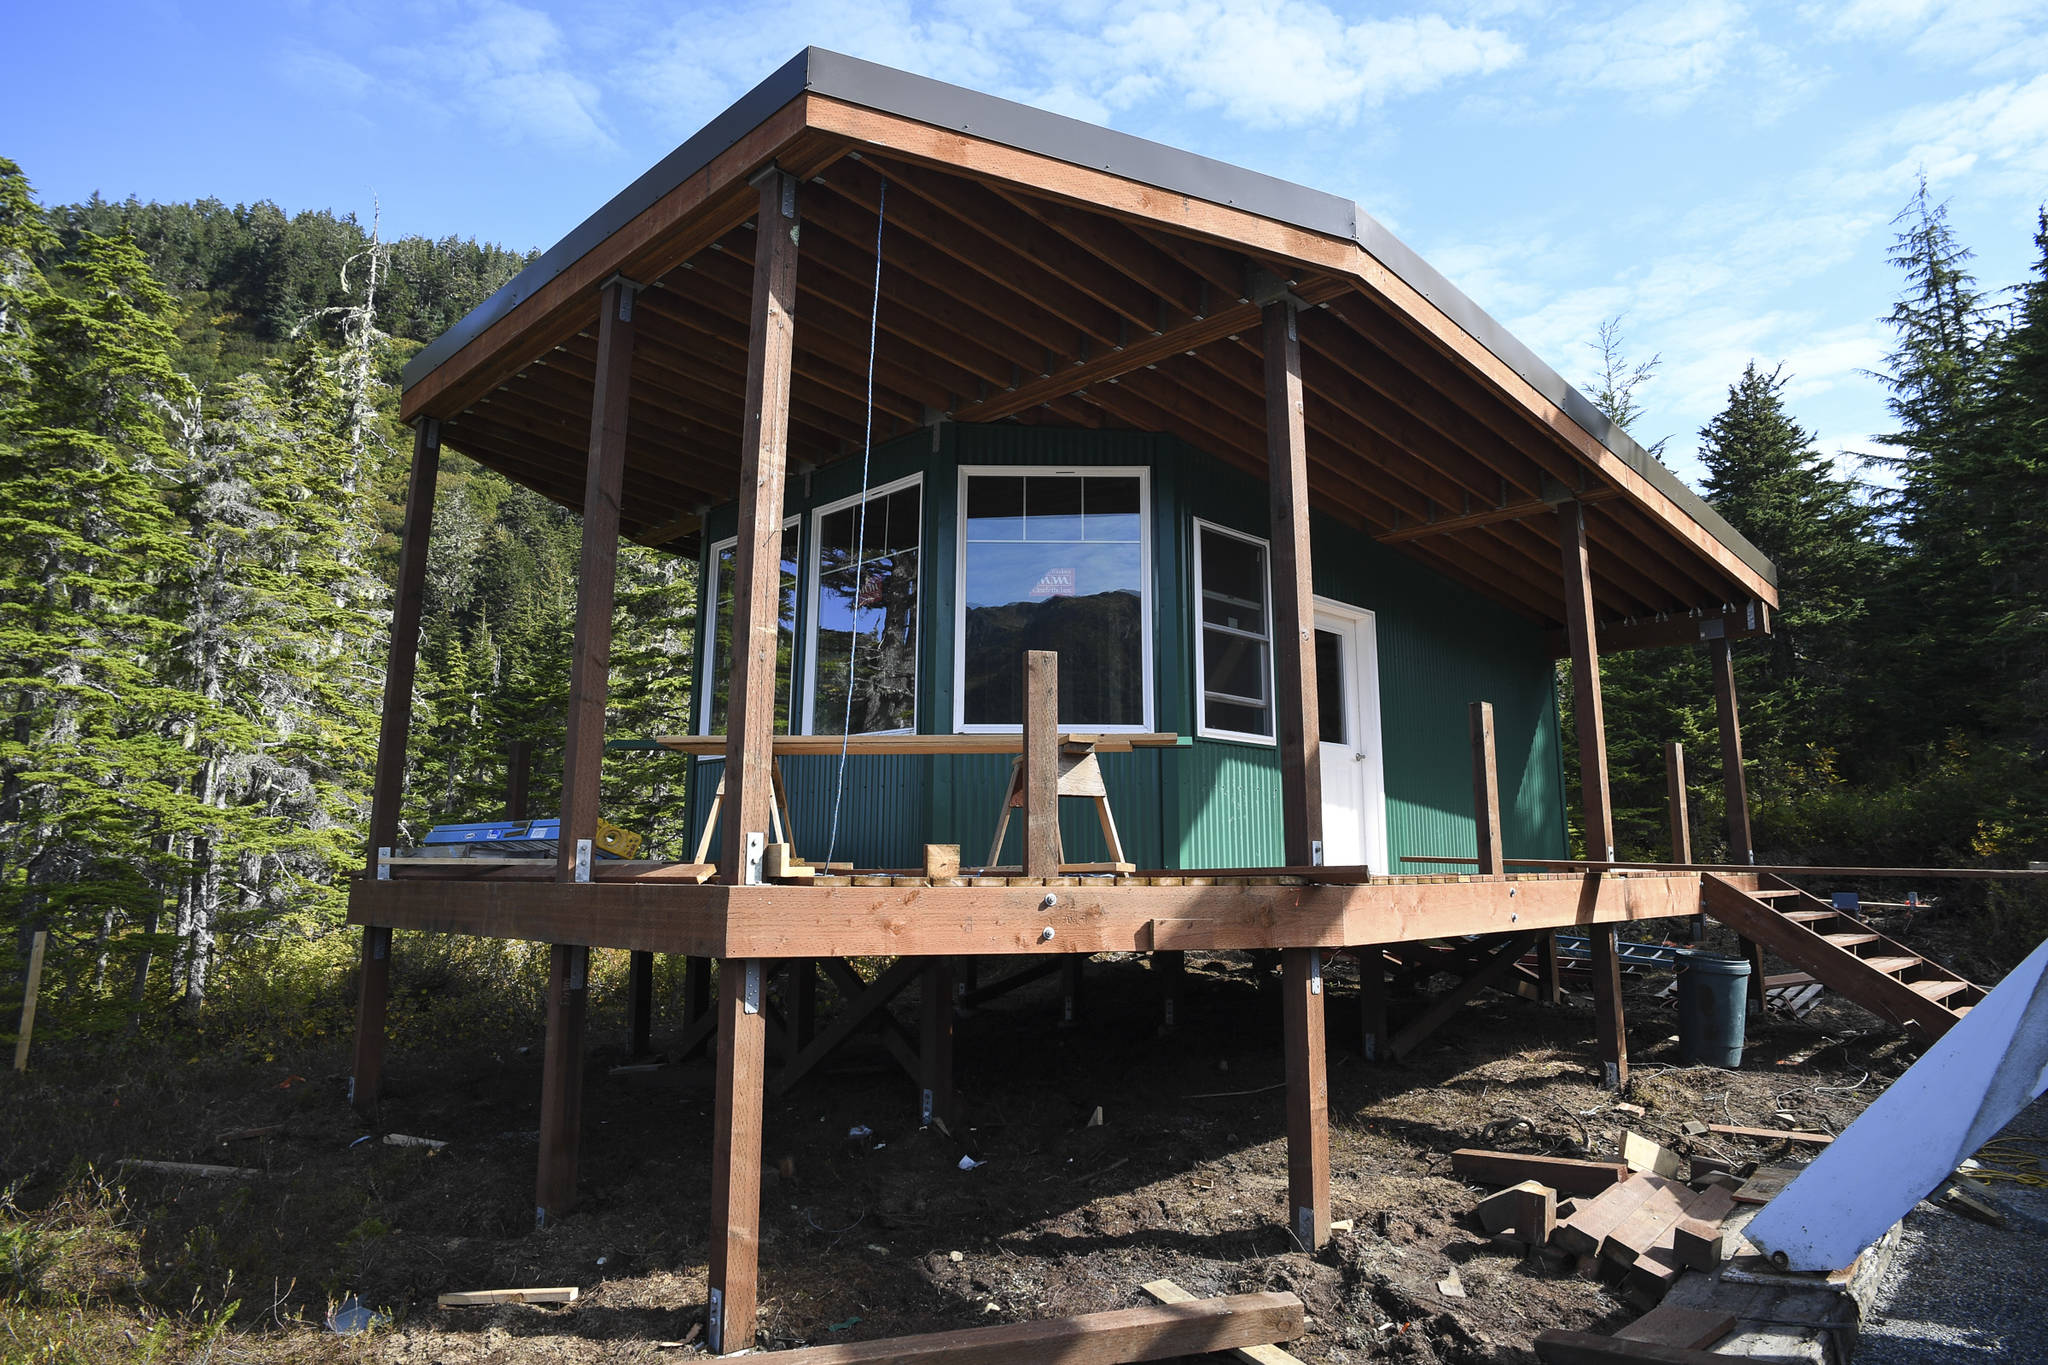 The Hilda Dam Cabin at Eaglecrest Ski Area is nearly complete on Monday, Sept. 9, 2019. The first city-owned cabin, that can sleep eight, will be open for rental in mid-October according to General Manager Dave Scanlan. (Michael Penn | Juneau Empire)